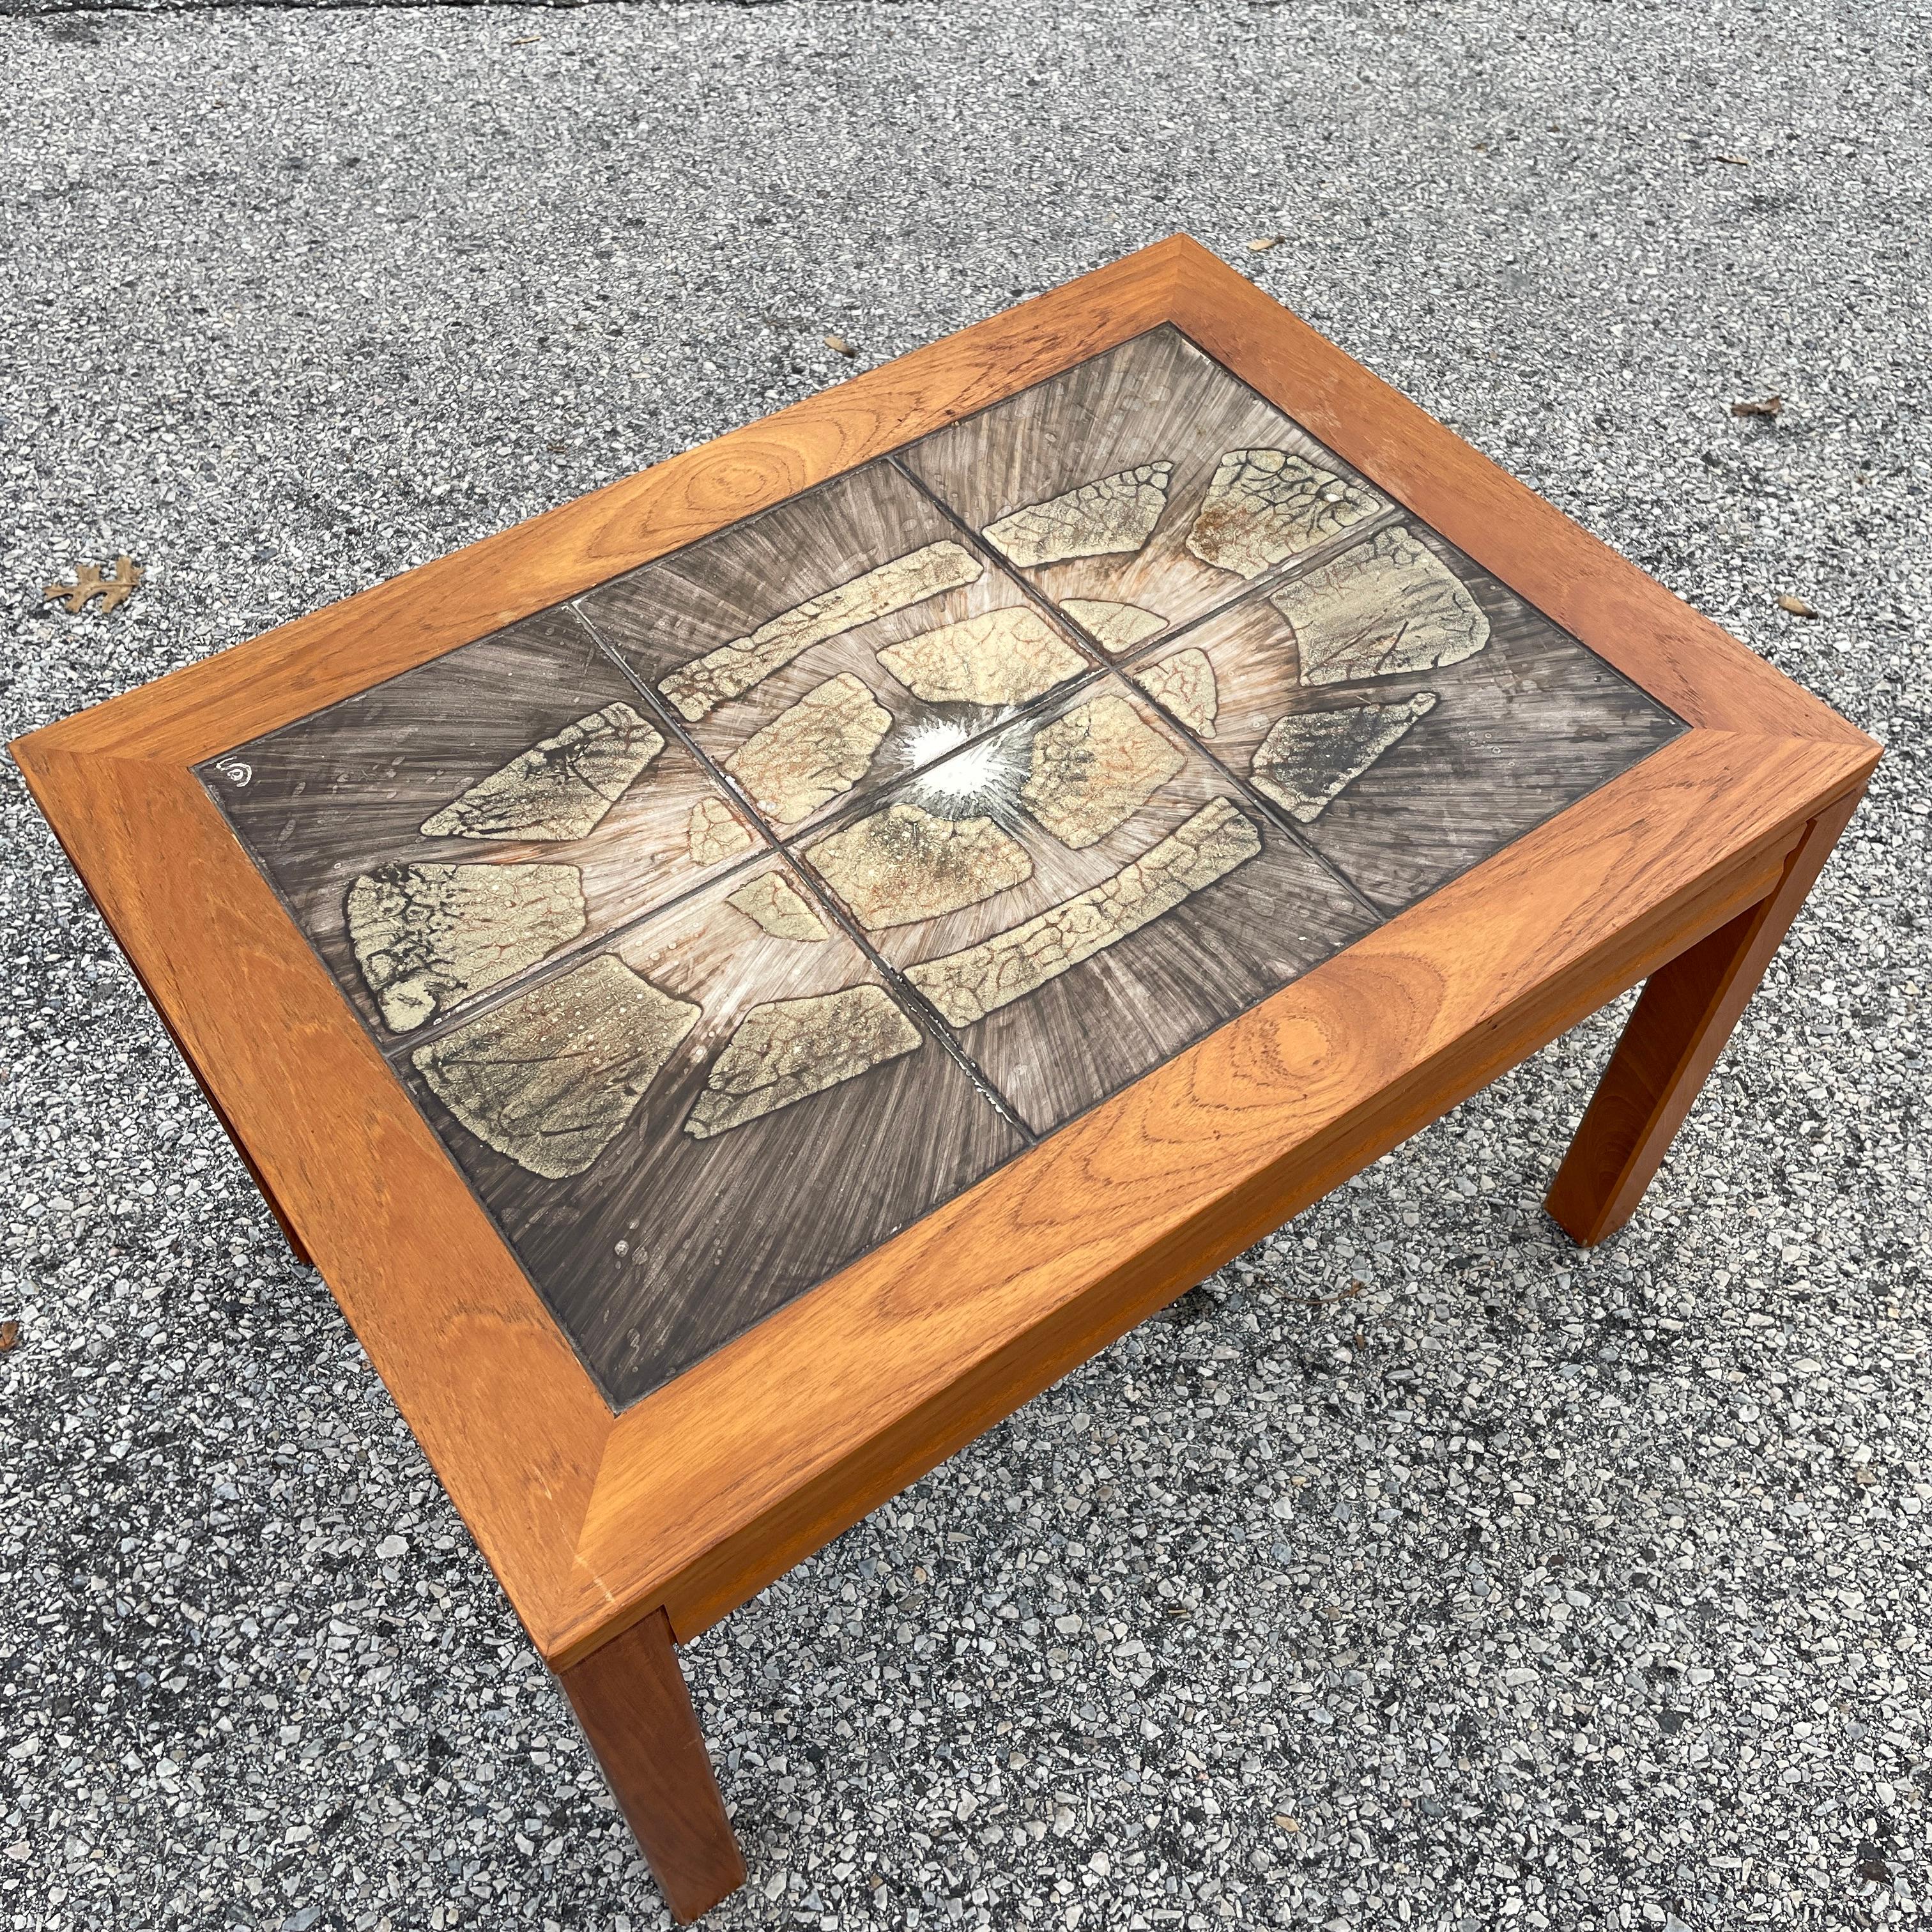 A mid-century side table with a teak frame and tile top. Signed with an 